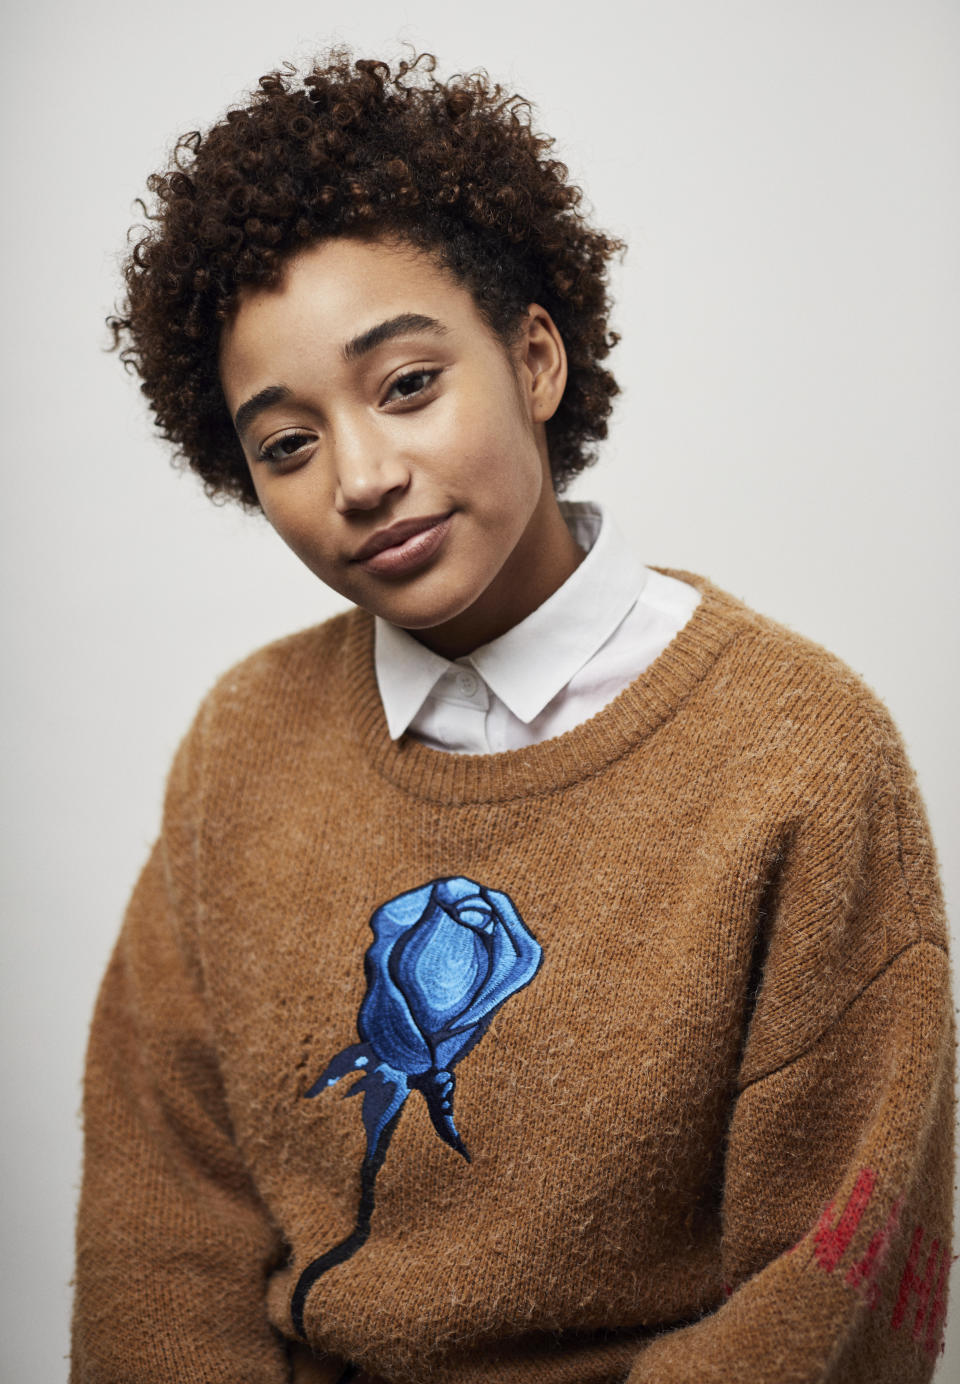 This Sept. 28, 2018 photo shows Amandla Stenberg during a portrait session in New York to promote her film, "The Hate U Give." (Photo by Matt Licari/Invision/AP)